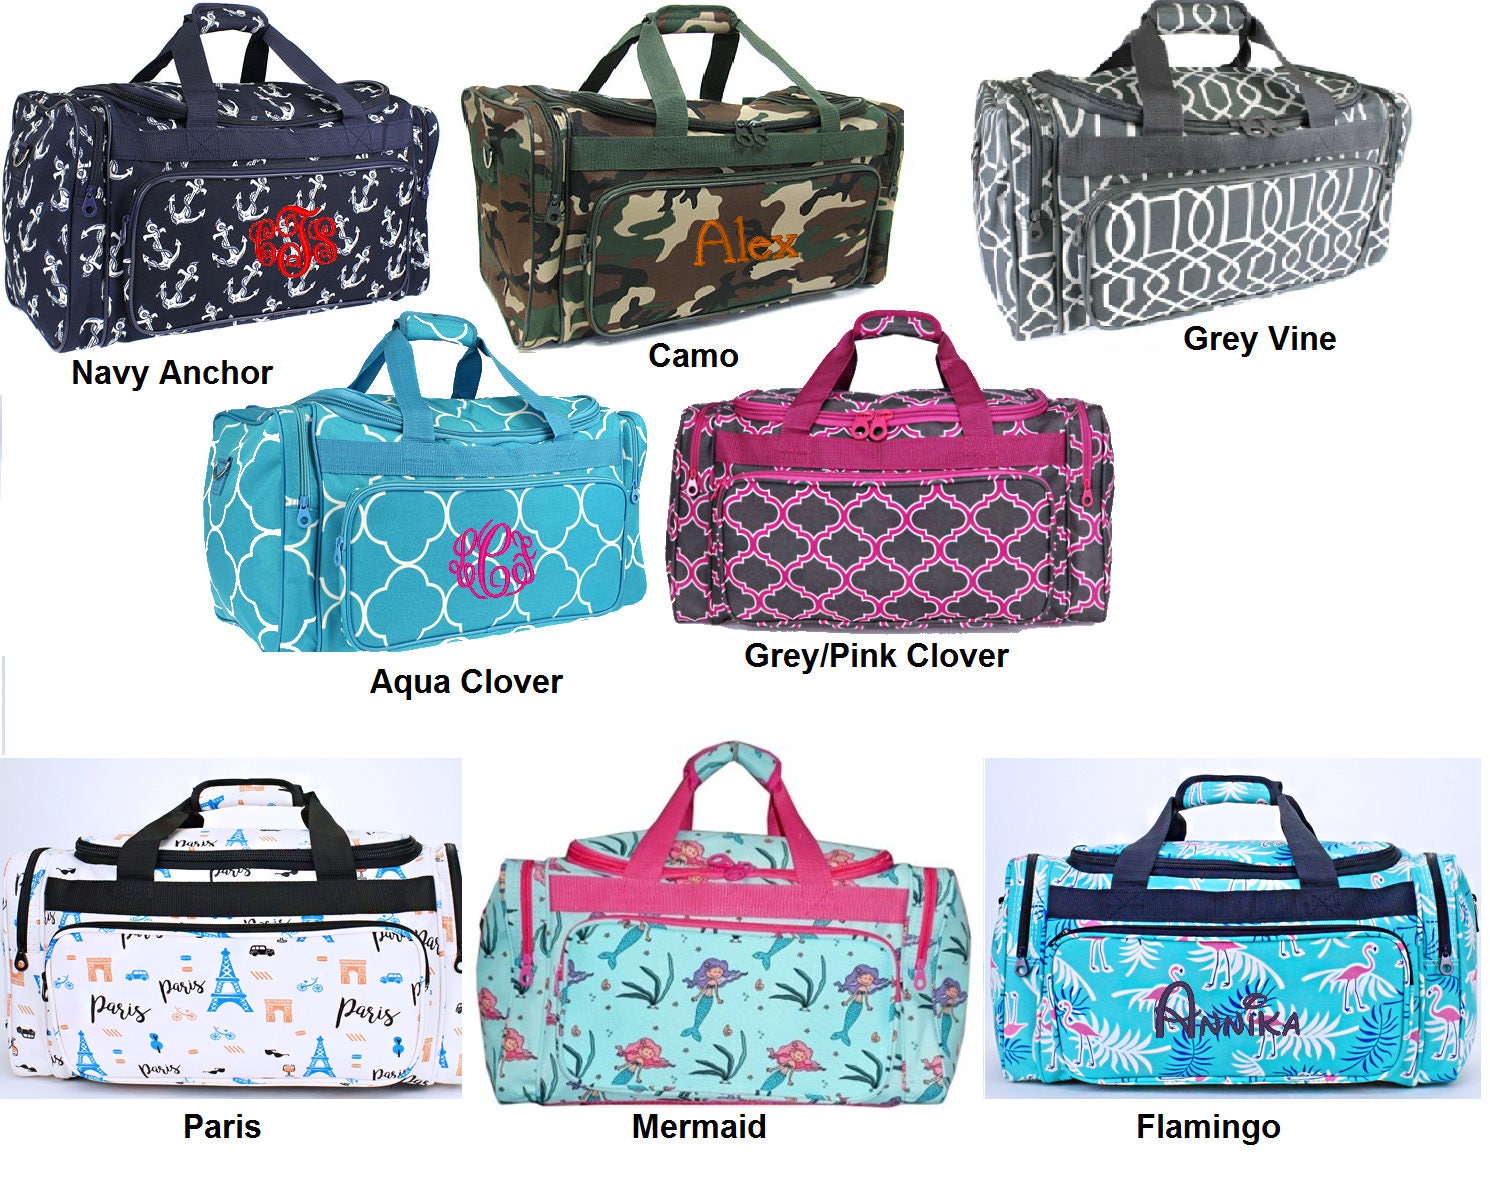 Personalized extra large 23in duffle bags. Great for travel